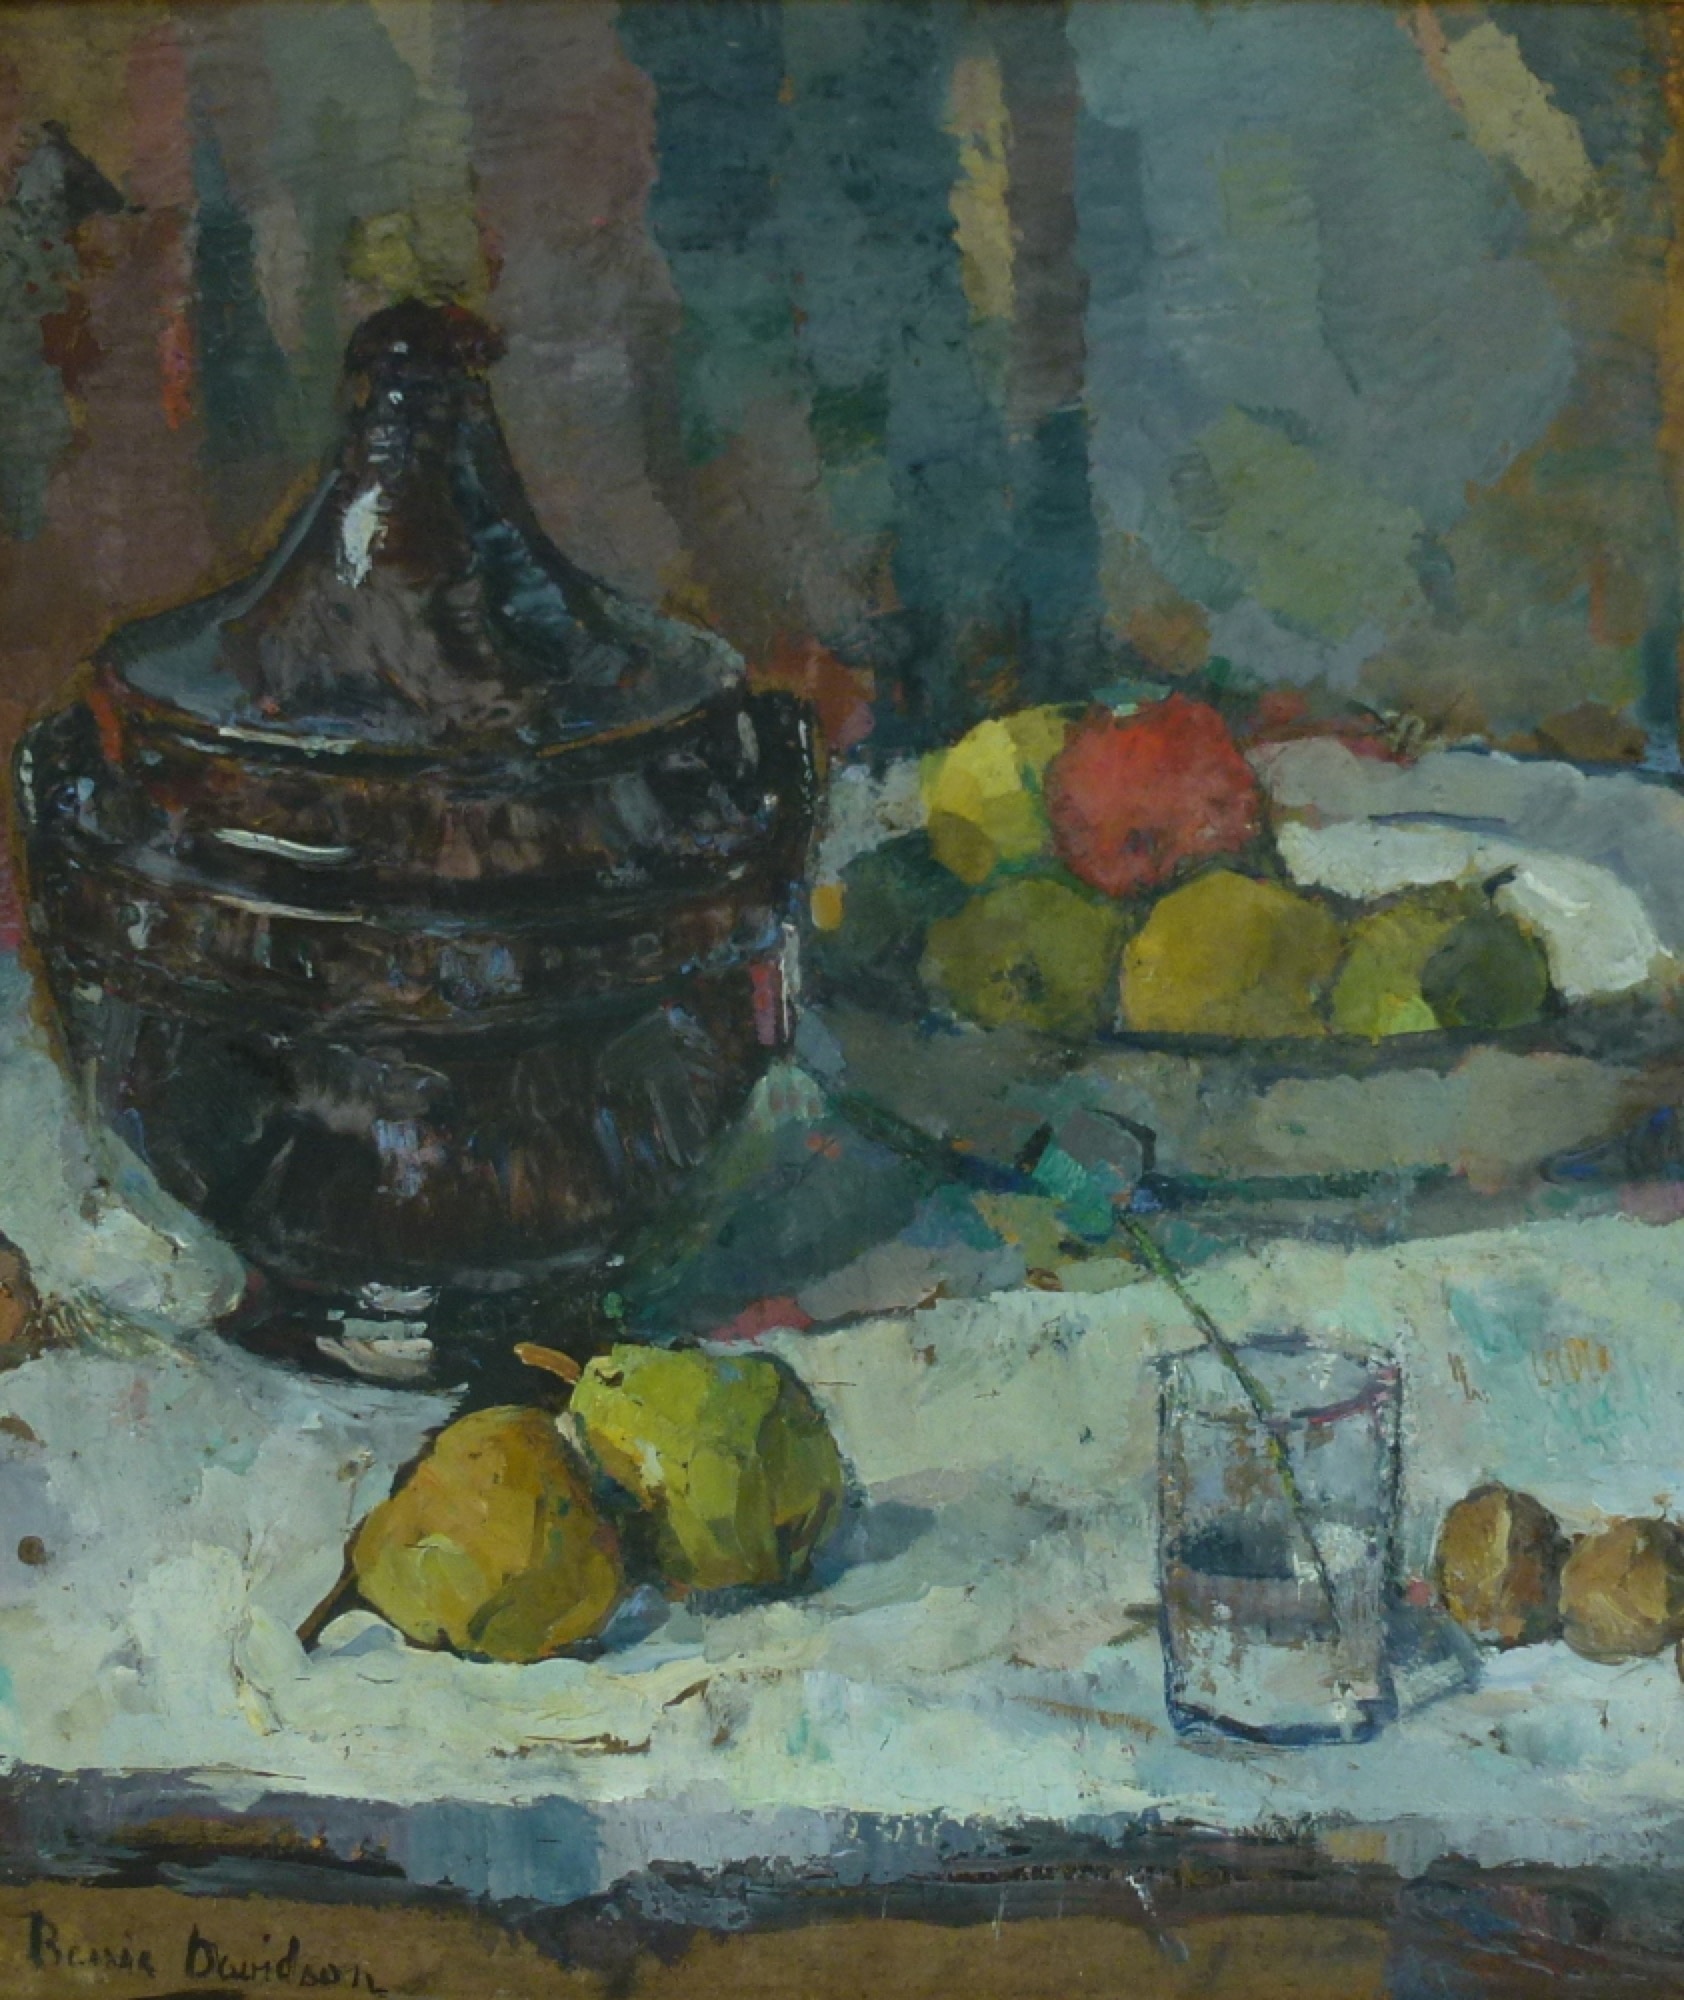 Bessie Davidson, <em>Still life with pears</em>, 1930s, oil on board, 52 x 45 cm, private collection, courtesy of Lauraine Diggins Fine Art.